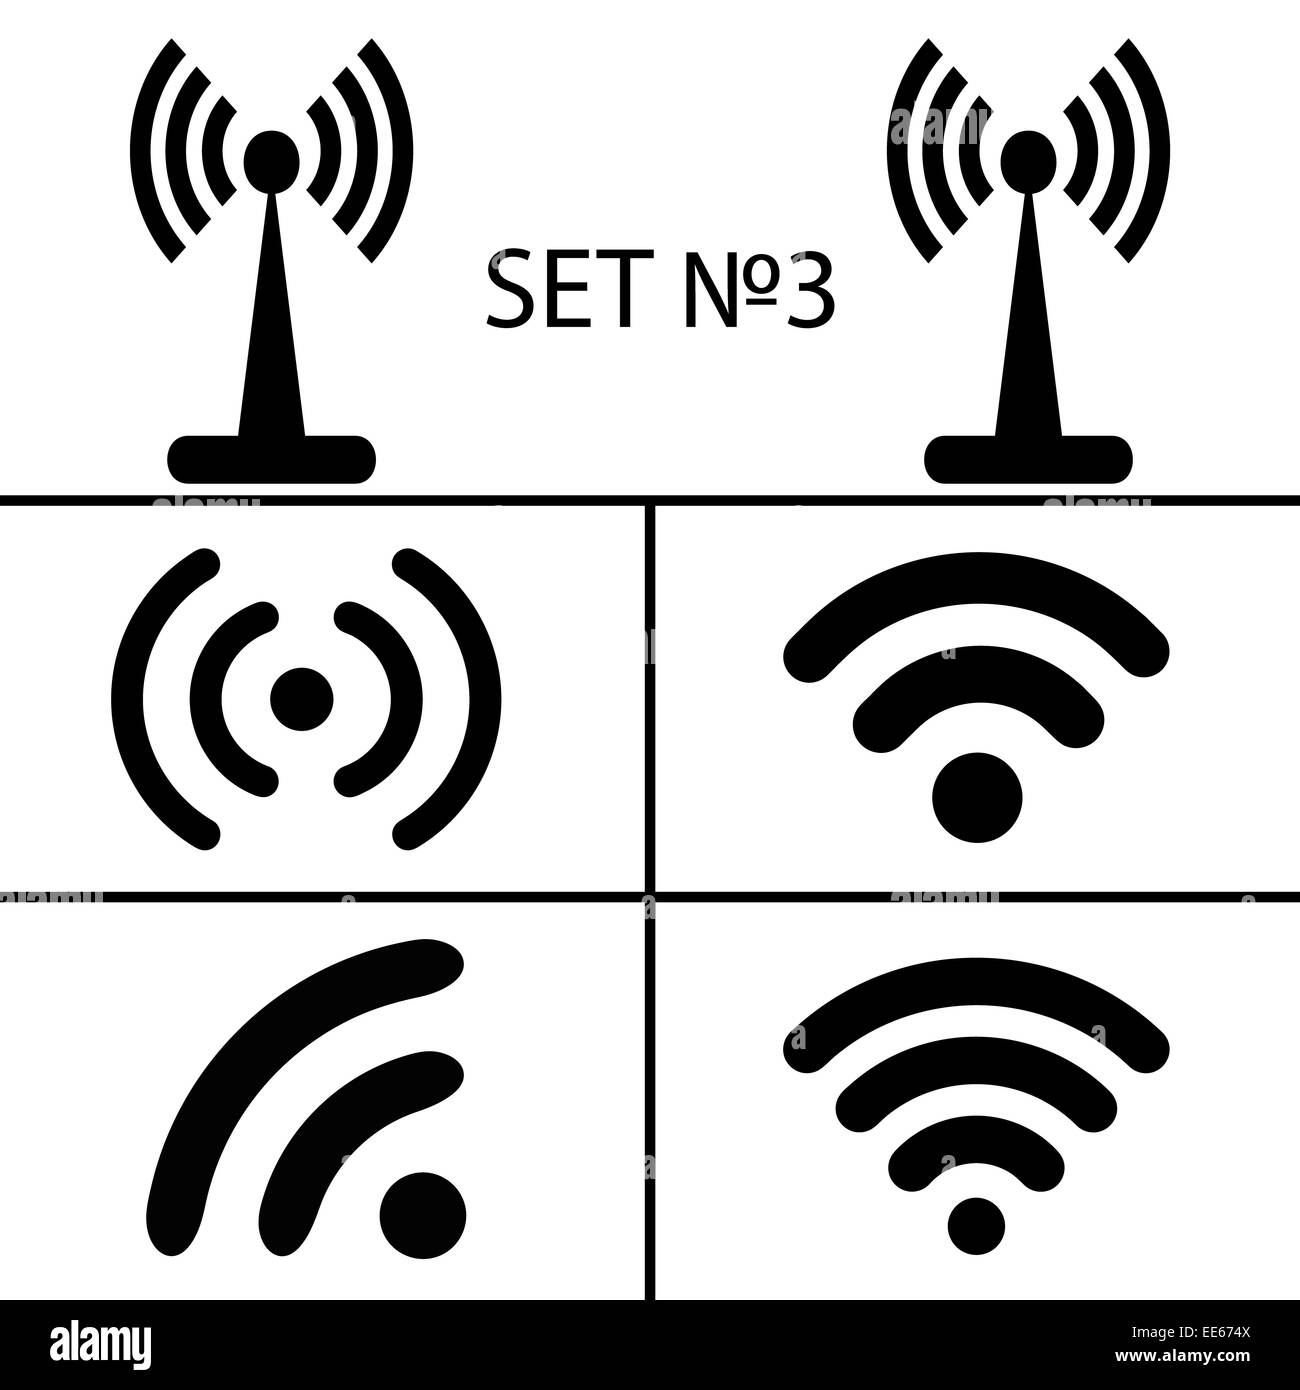 Set 3. Fourteen different black wireless and wifi icons for remote access communication via radio waves. Vector illustration EPS10 Stock Photo